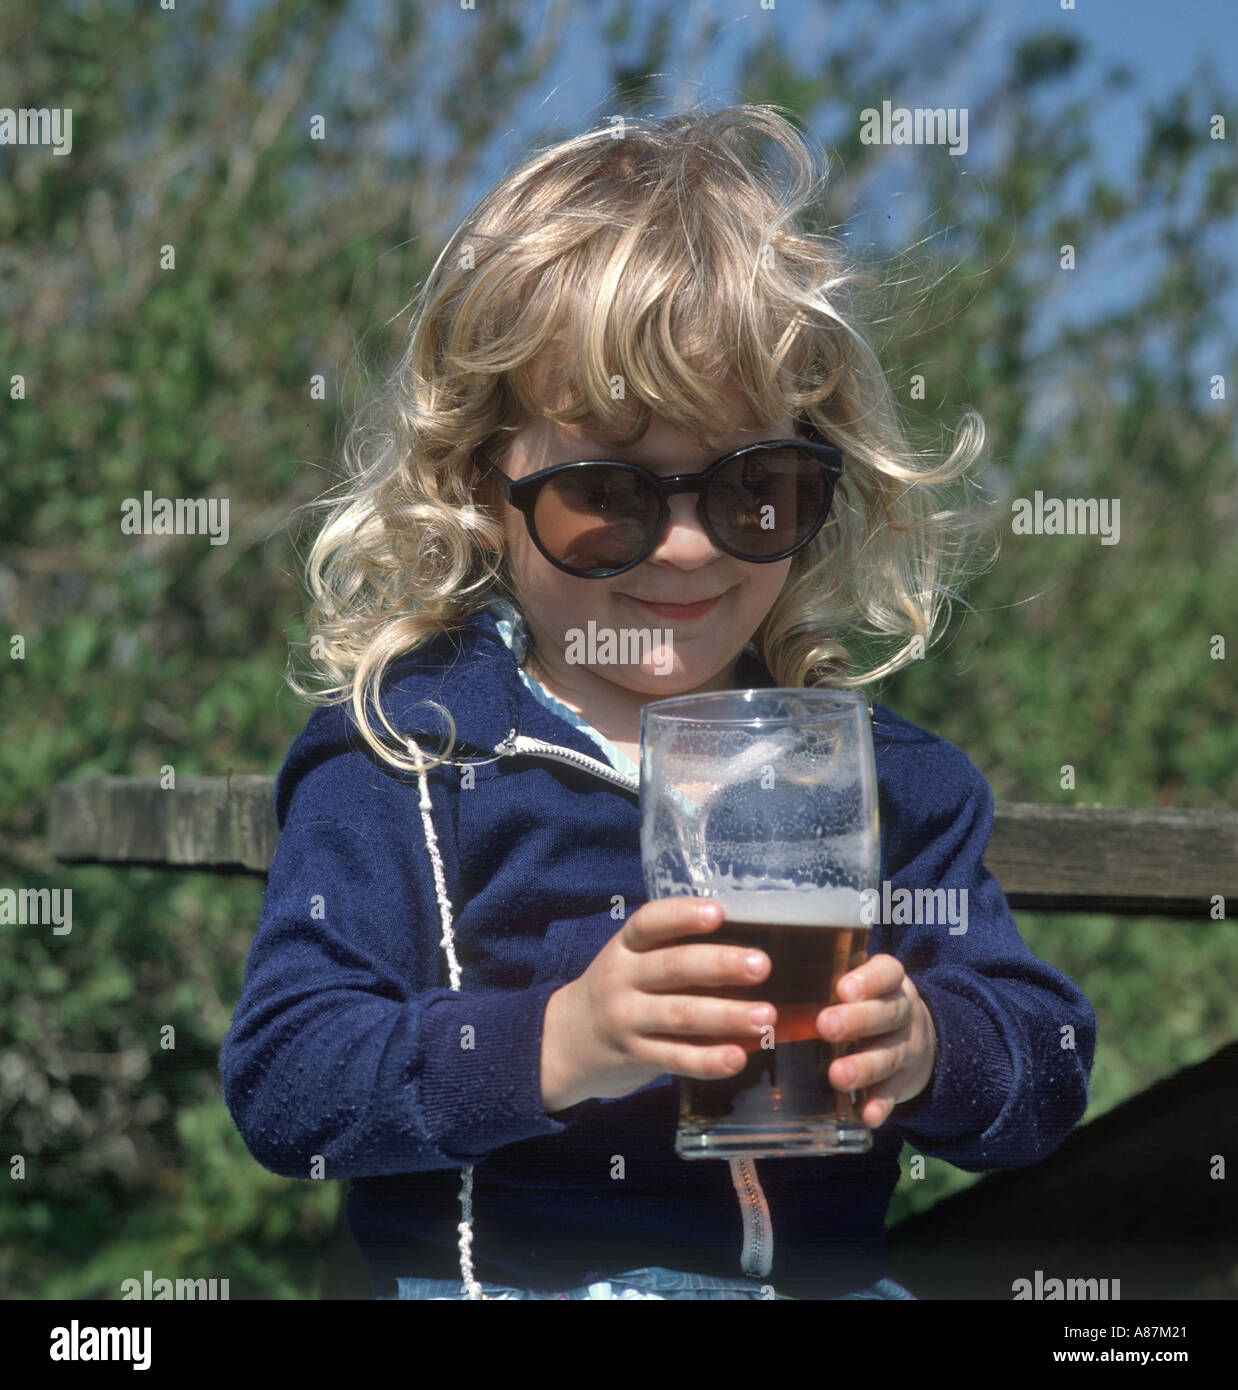 Little Girl trying to drink a pint of beer and wearing oversized sunglasses, England, United Kingdom Stock Photo